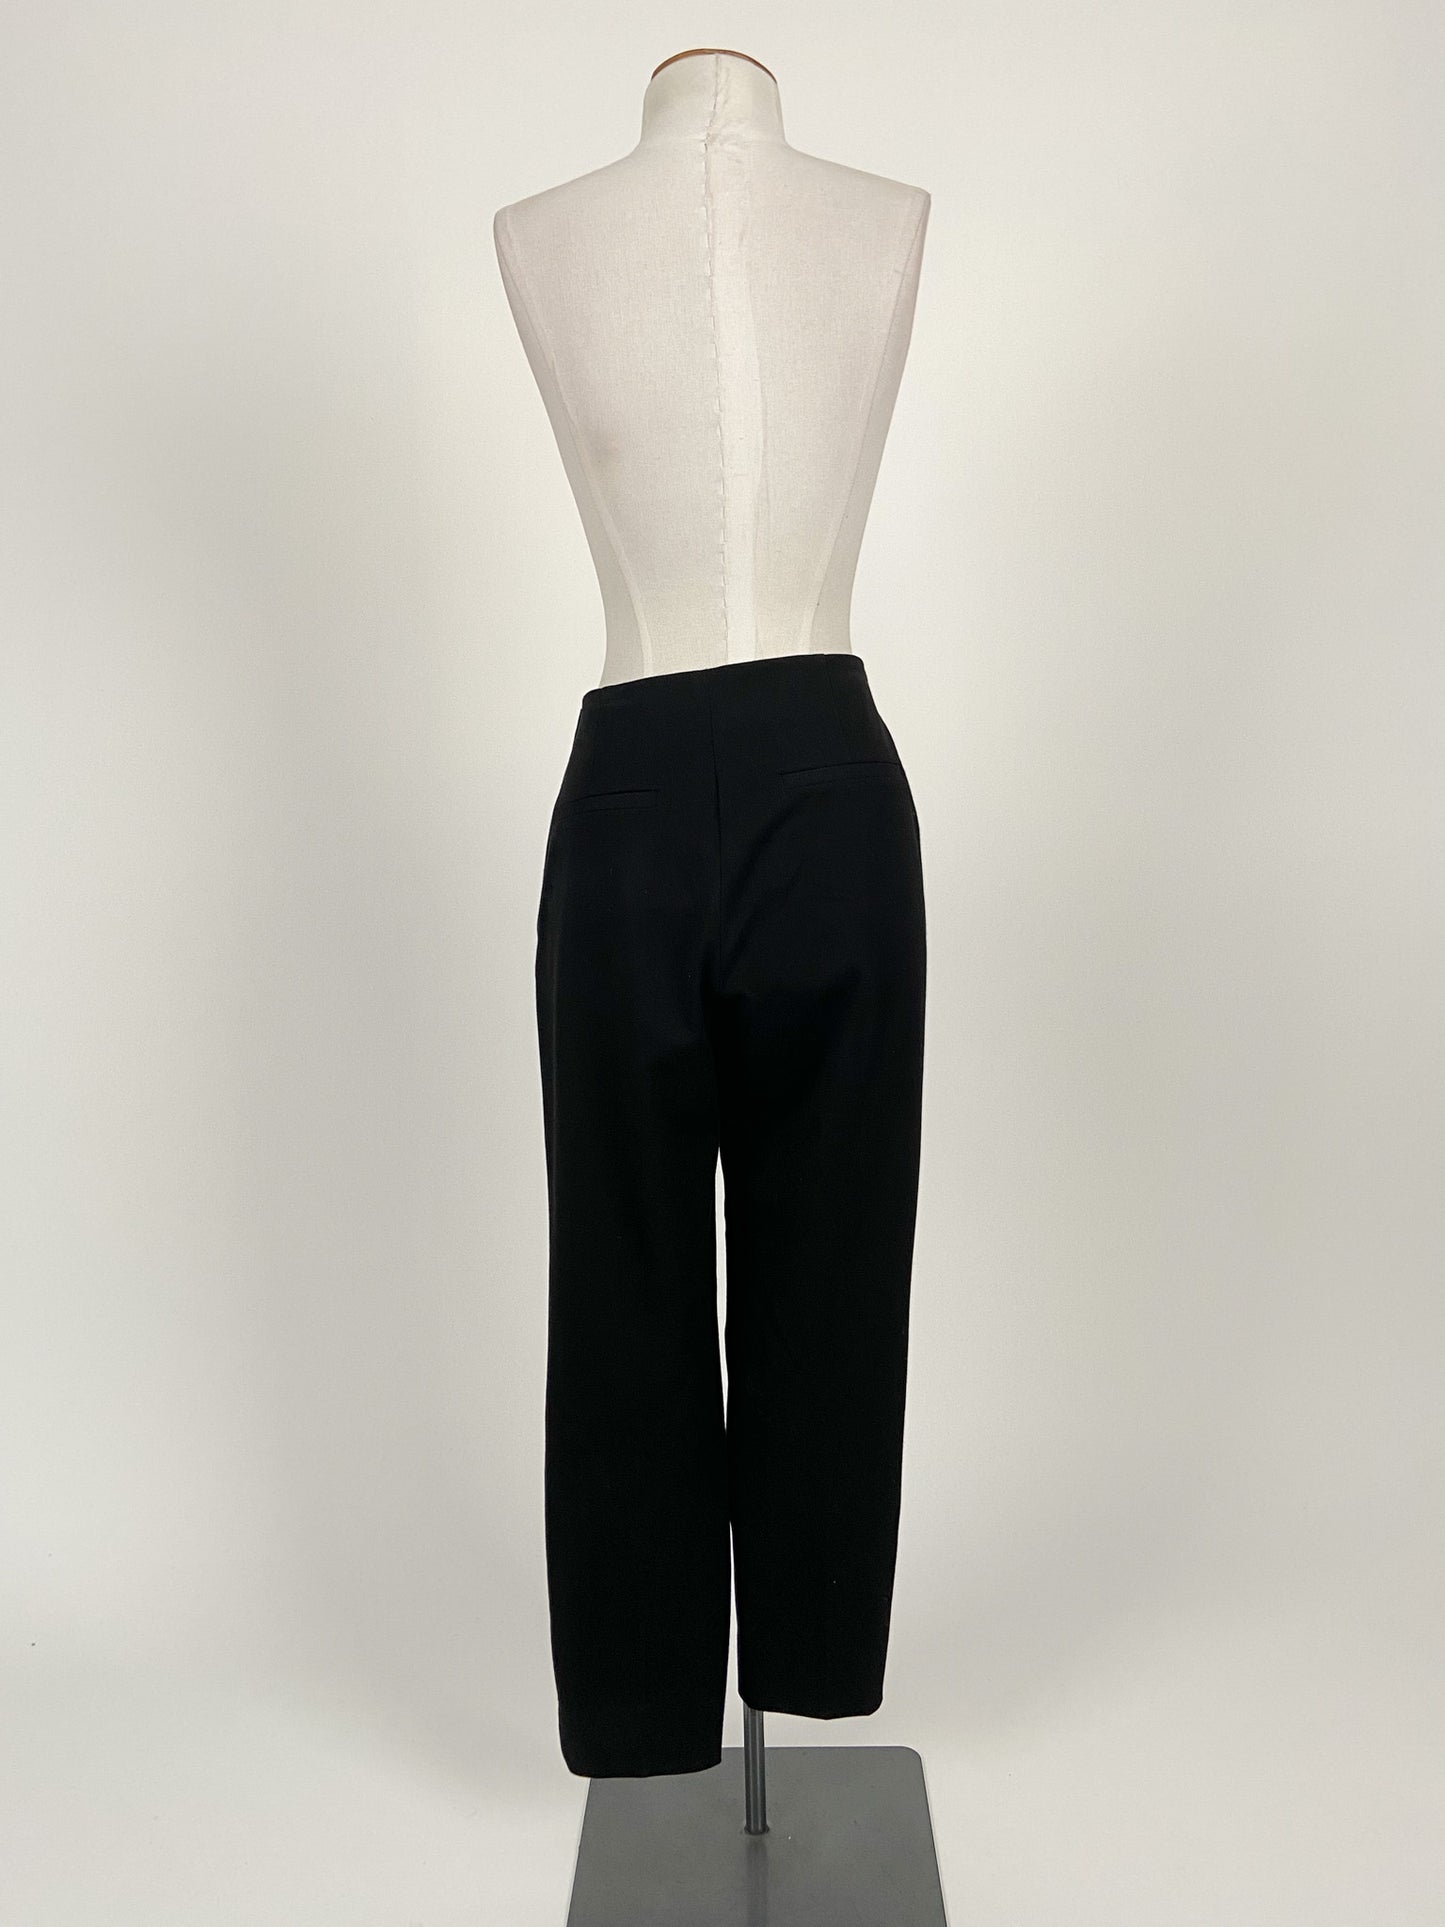 H&M | Black Stretchy Straight fit Pants | Size S